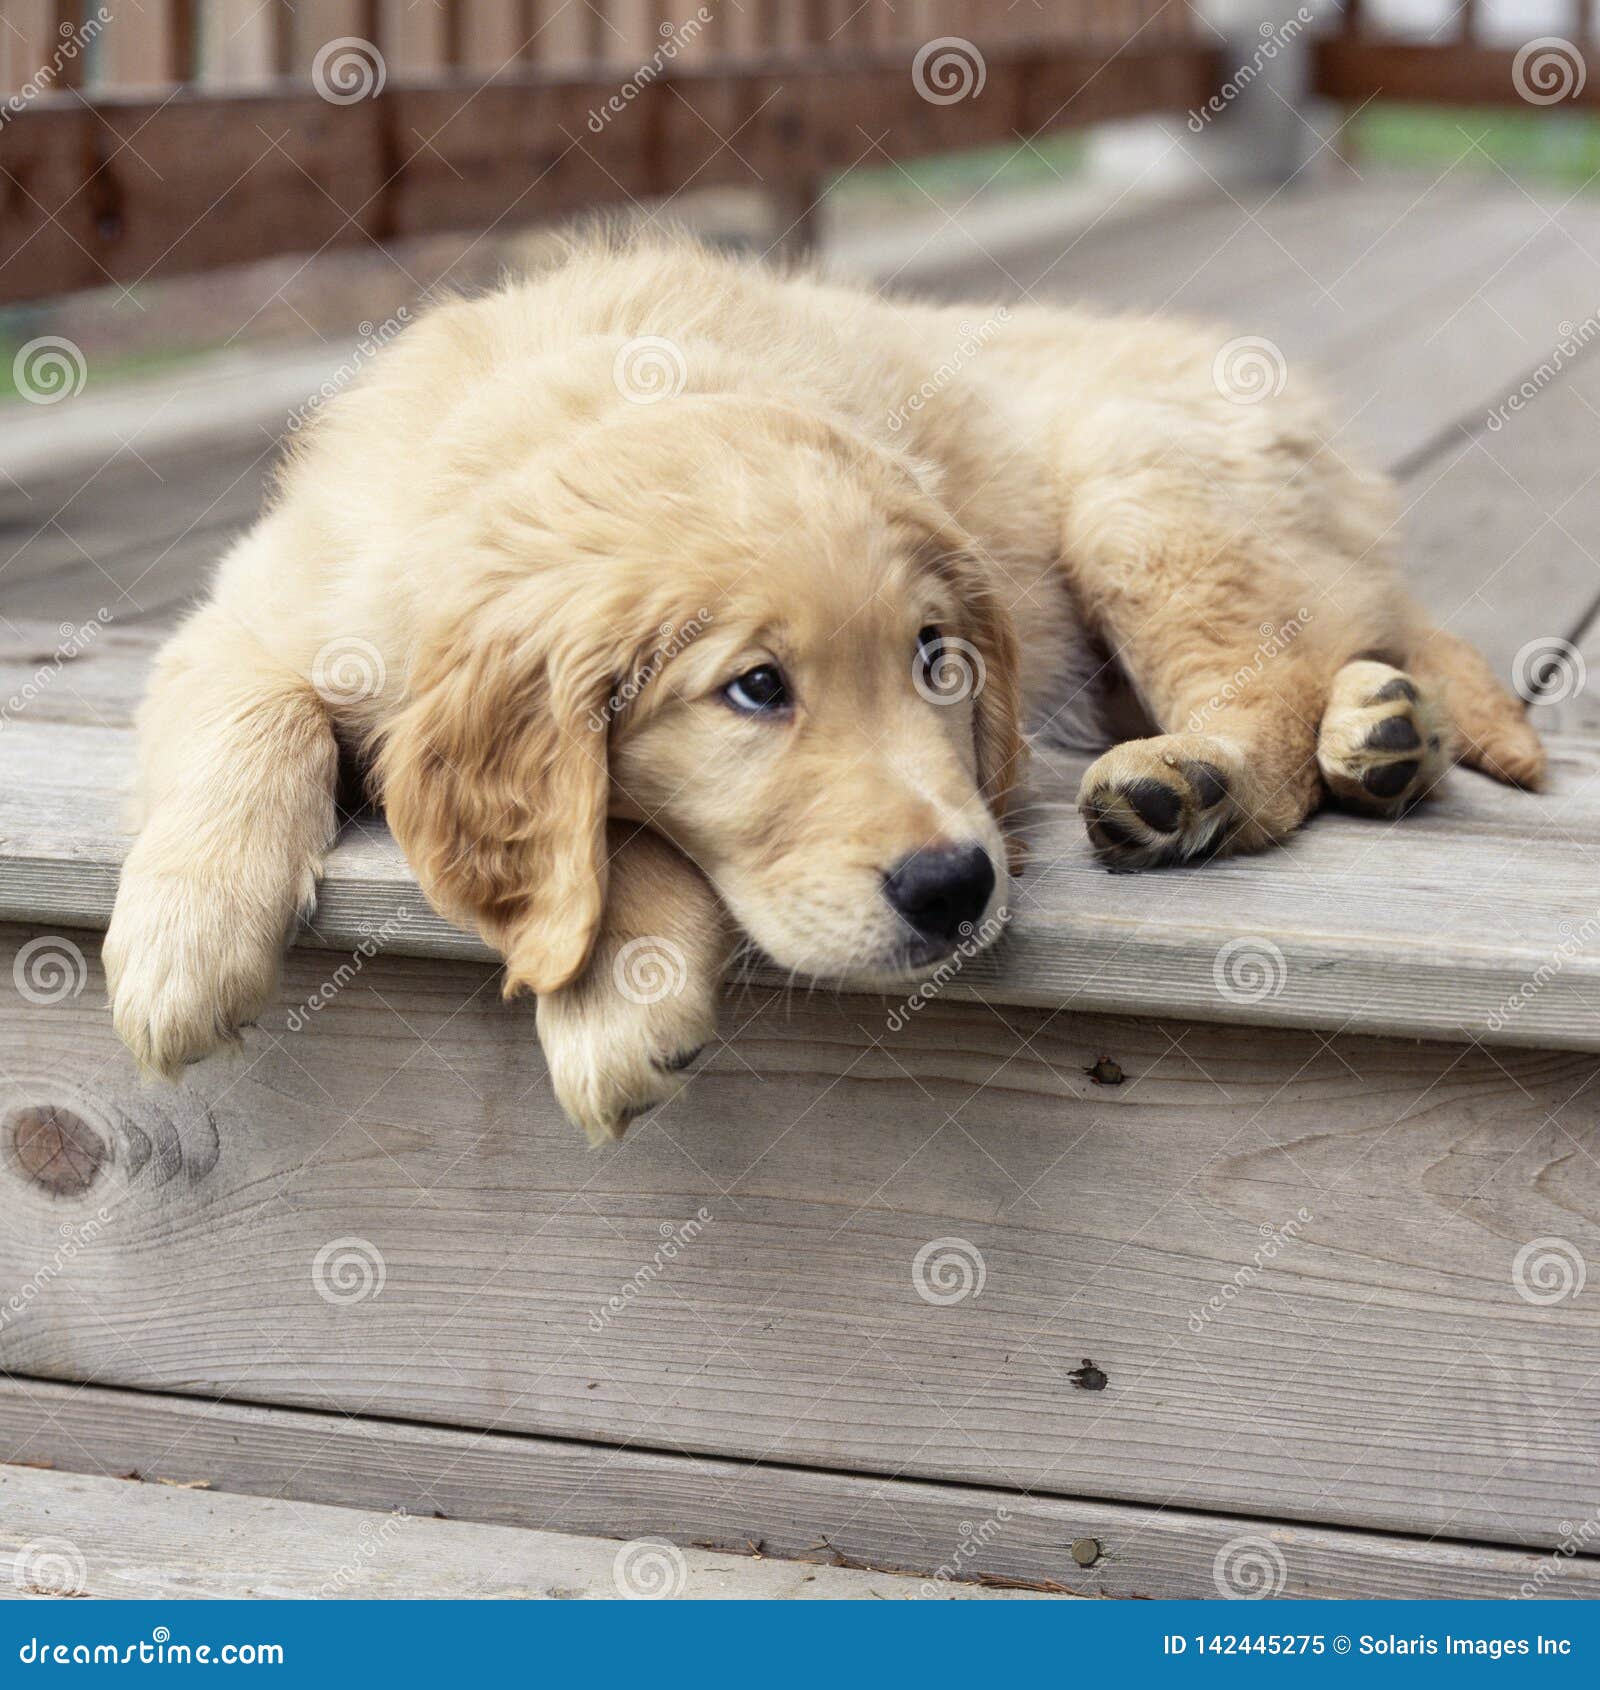 Golden Lab Labrador Retriever Puppy Pet with Sad, Sulky, Pouting  Expression. Cute, Funny, Bad, Bored Dog Concept. Stock Image - Image of dogs,  canine: 142445275